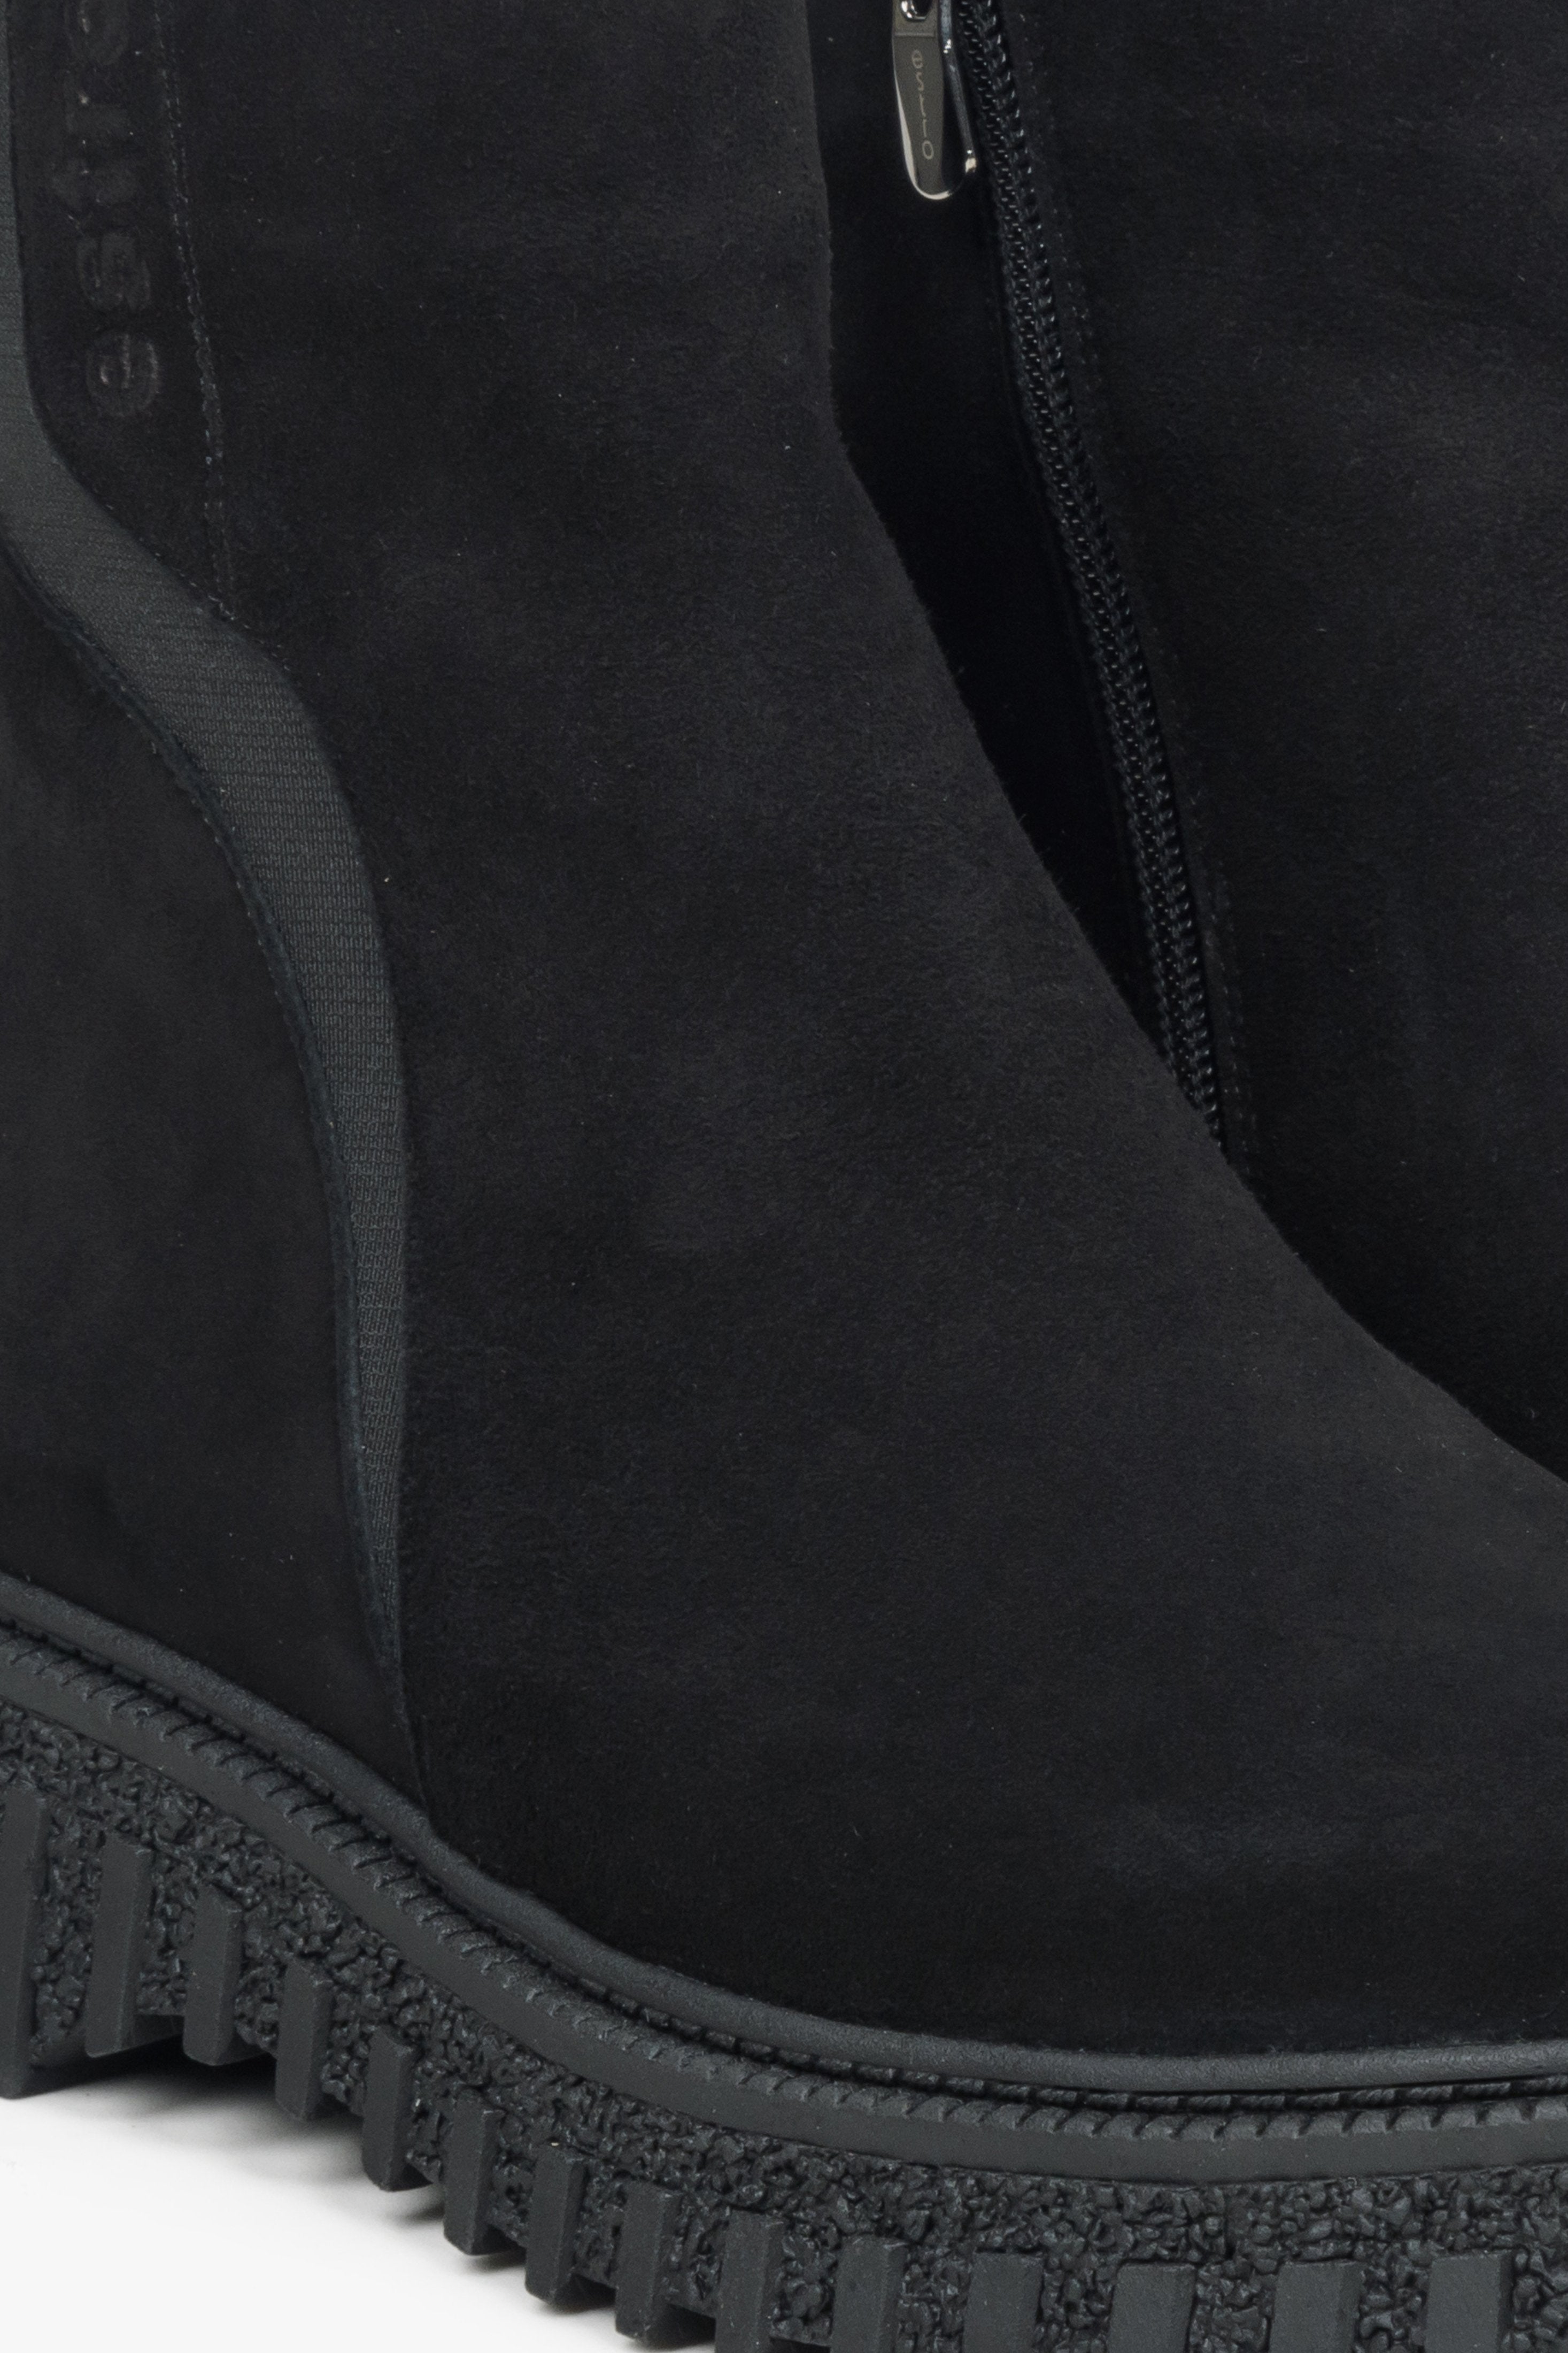 Women's black velour ankle boots - a close-up on details.